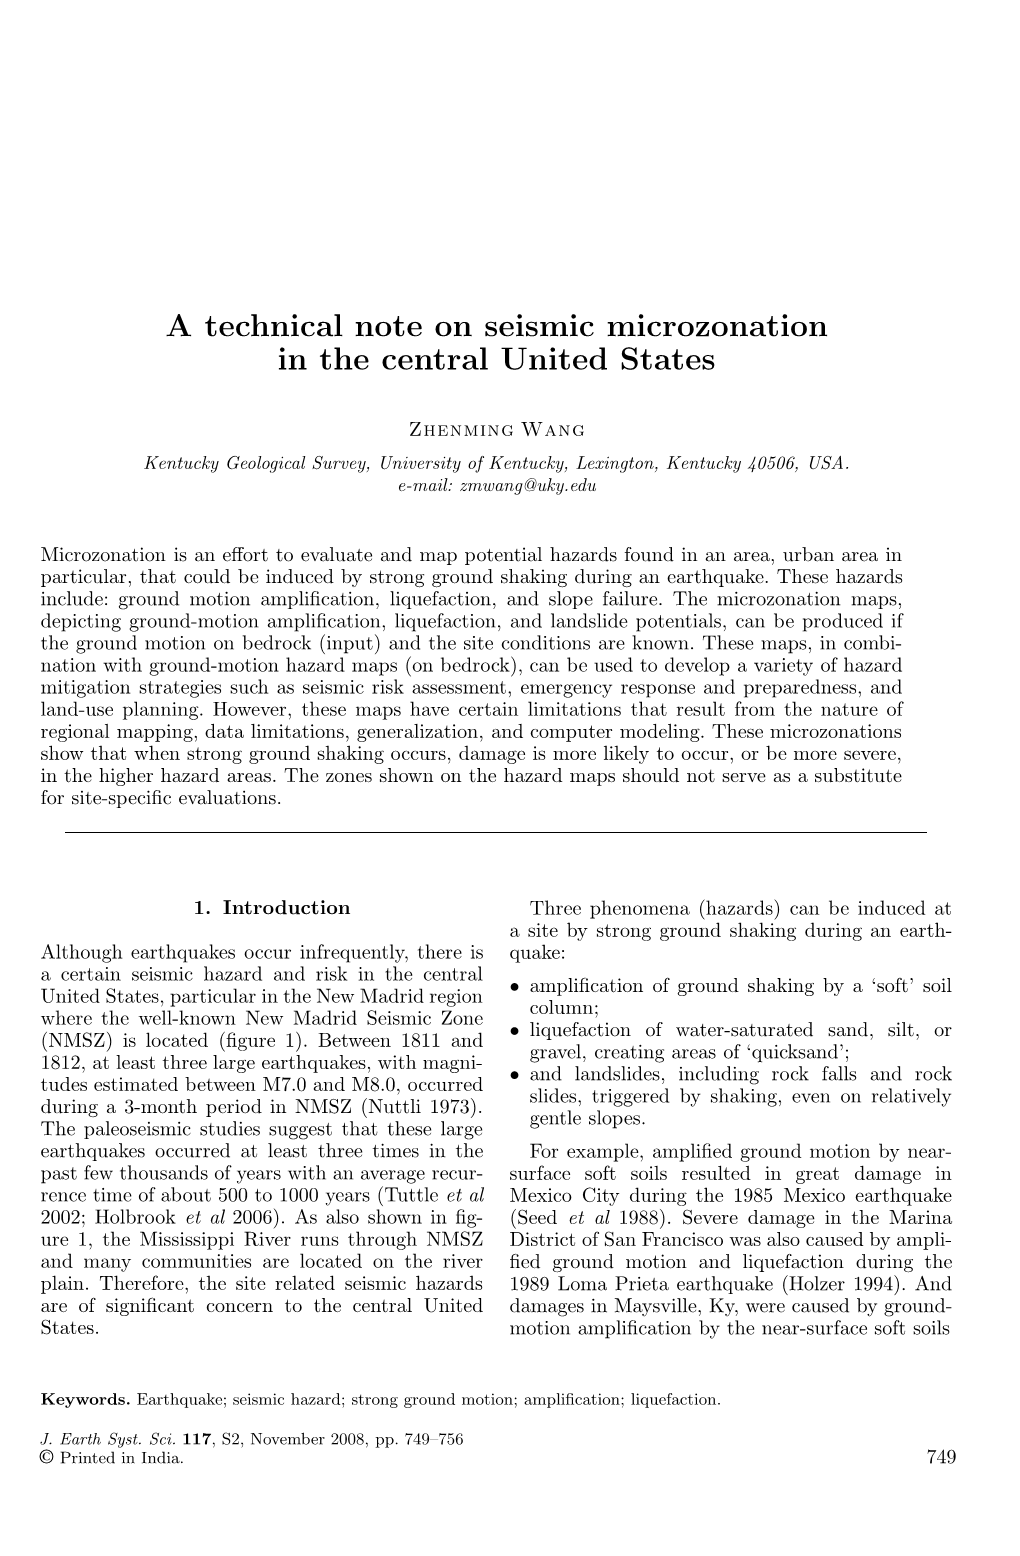 A Technical Note on Seismic Microzonation in the Central United States